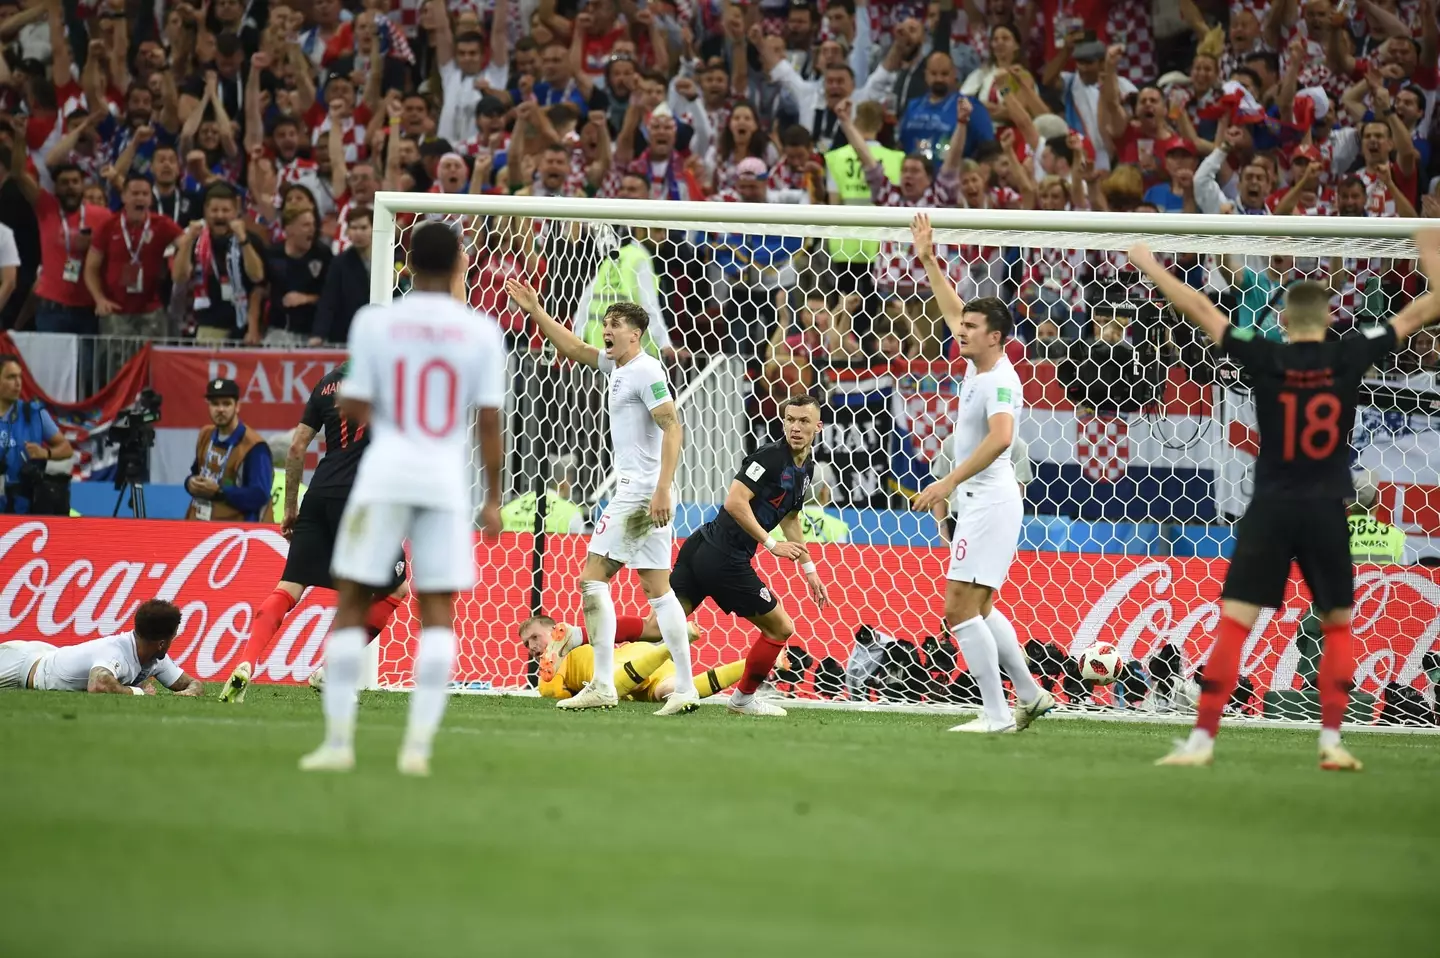 Perisic celebrates after scoring against England in the World Cup Semi Final, 2018.